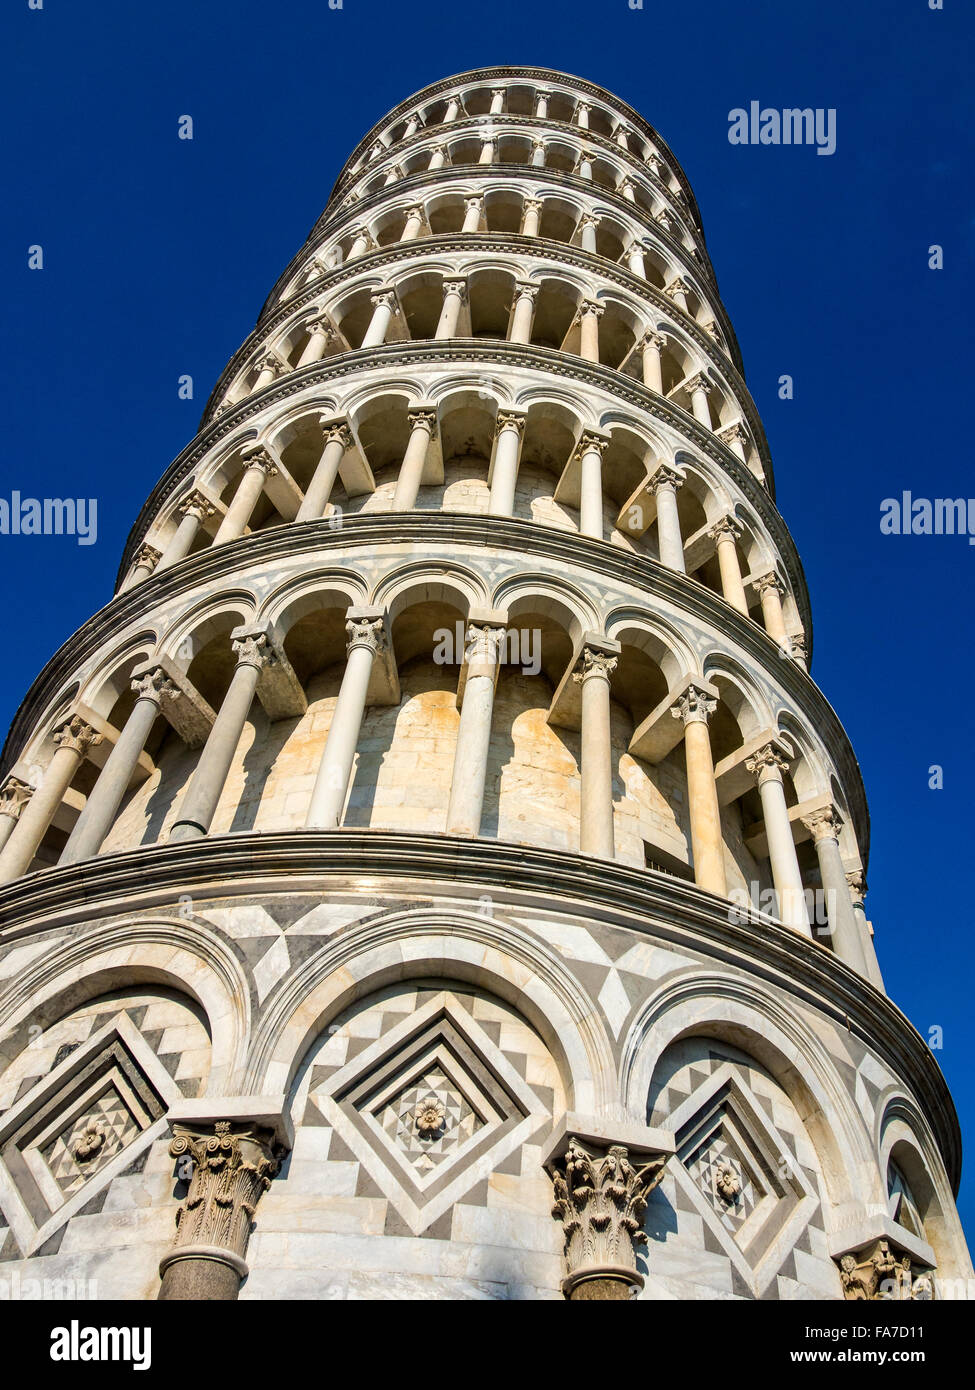 PISA,  ITALY - AUGUST 05, 2015:  Exterior view of the Leaning Tower of Pisa (Torre Pendente di Pisa) Stock Photo